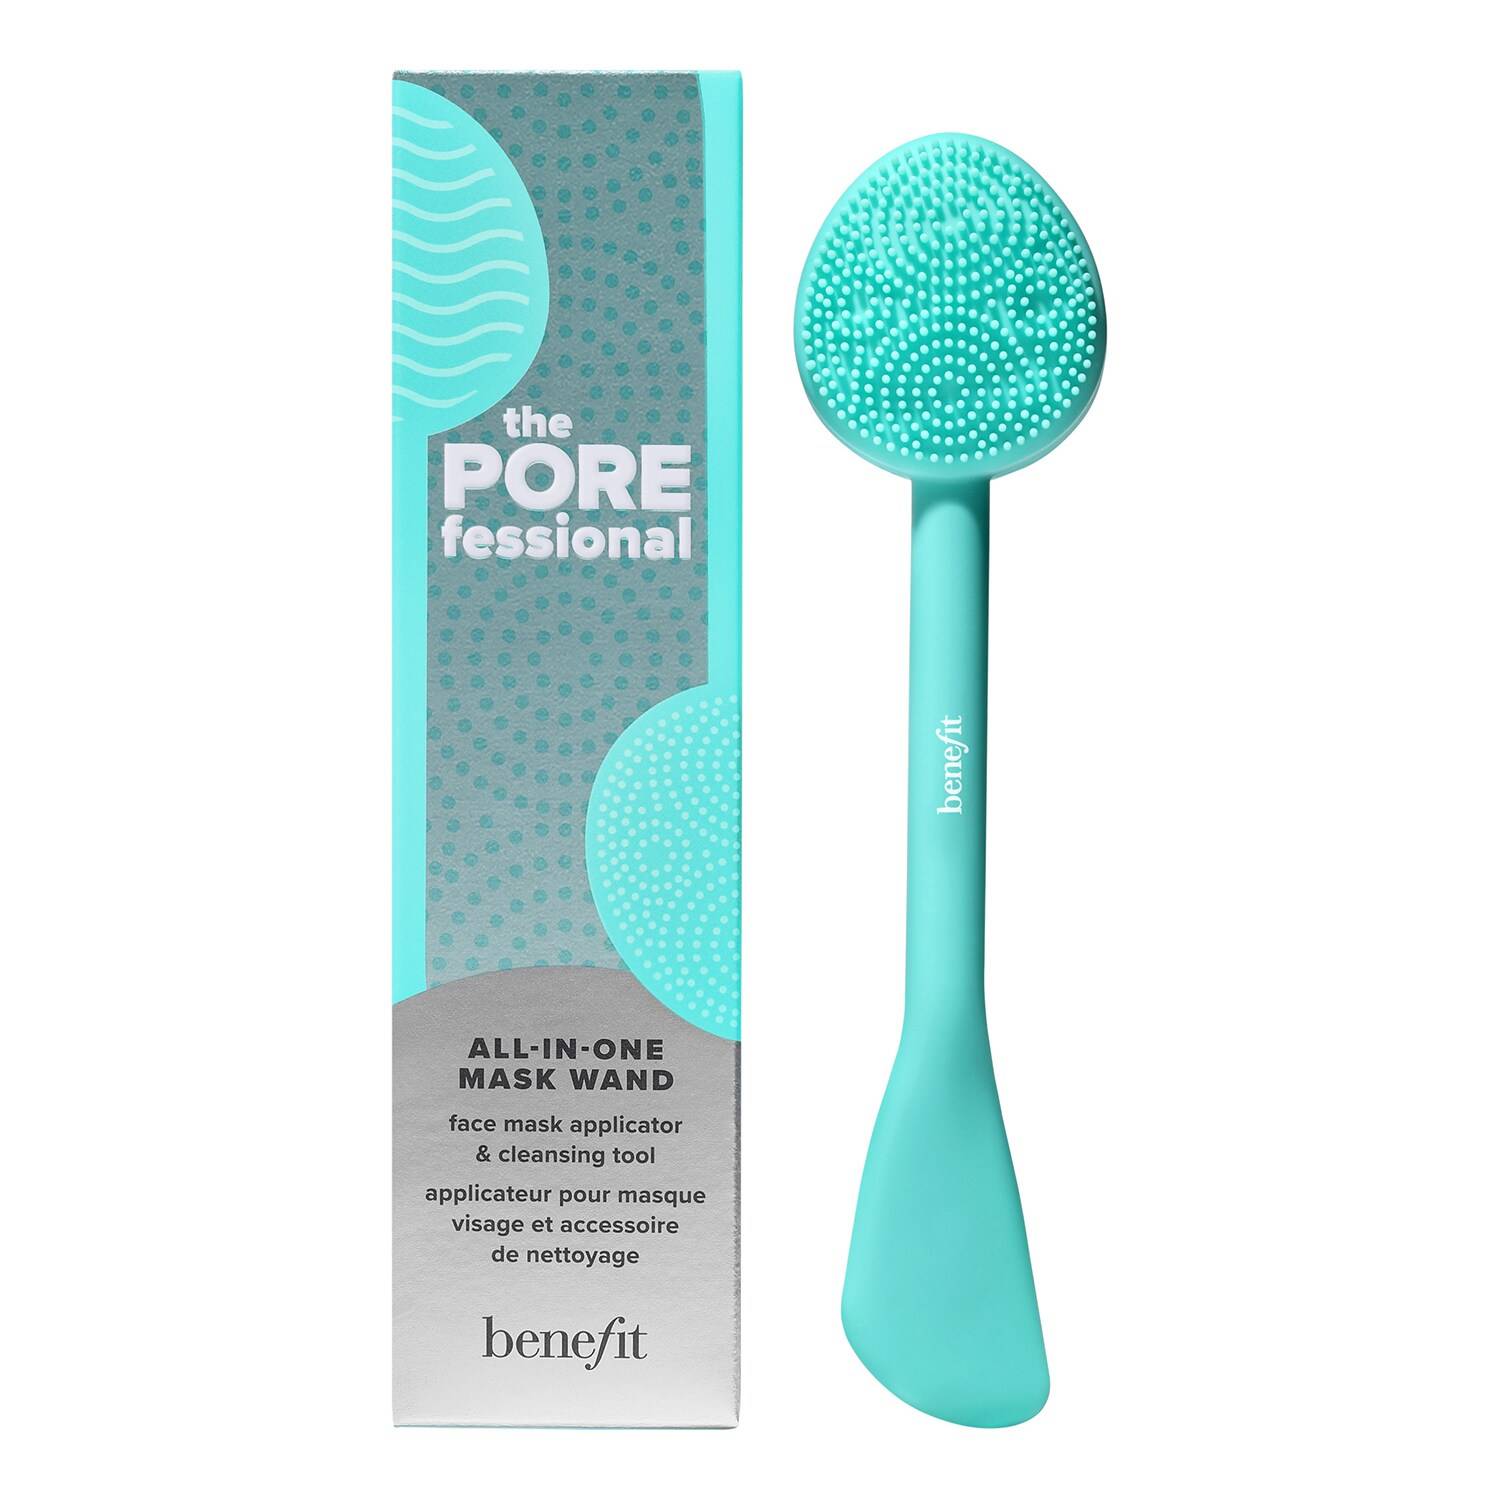 Benefit Cosmetics The Porefessional - All-In-One Mask Wand Applicator